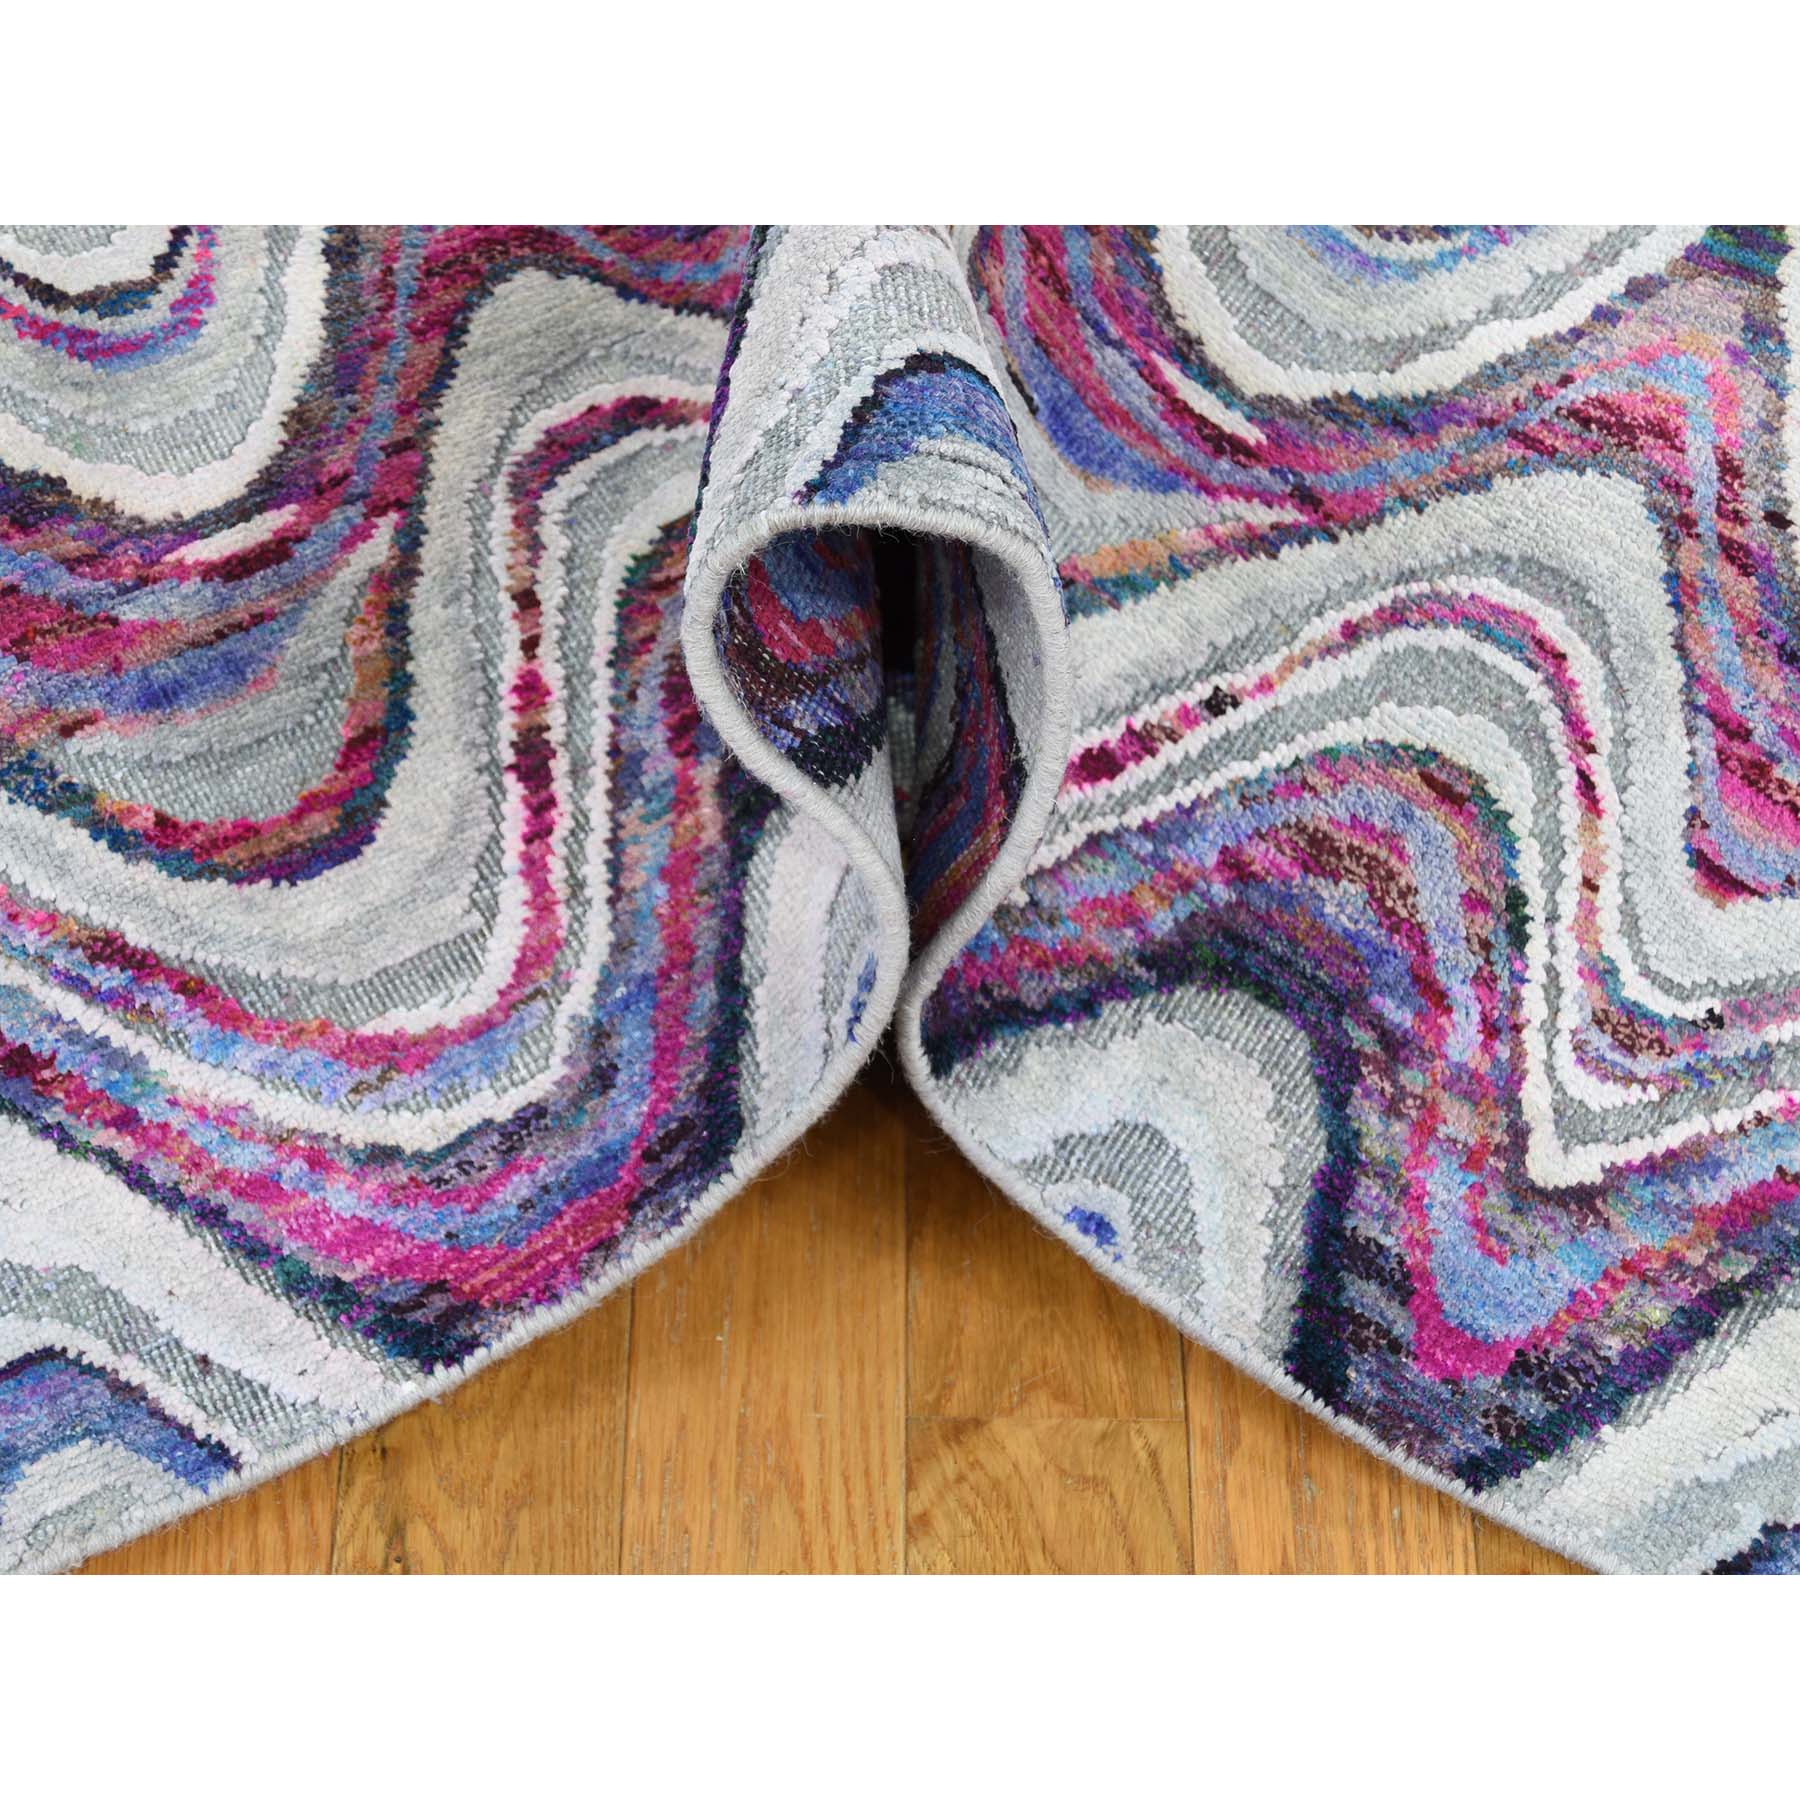 9-x11-10  THE WAVES IN PARADISE Sari Silk with Textured Wool Hand-Knotted Oriental Rug 